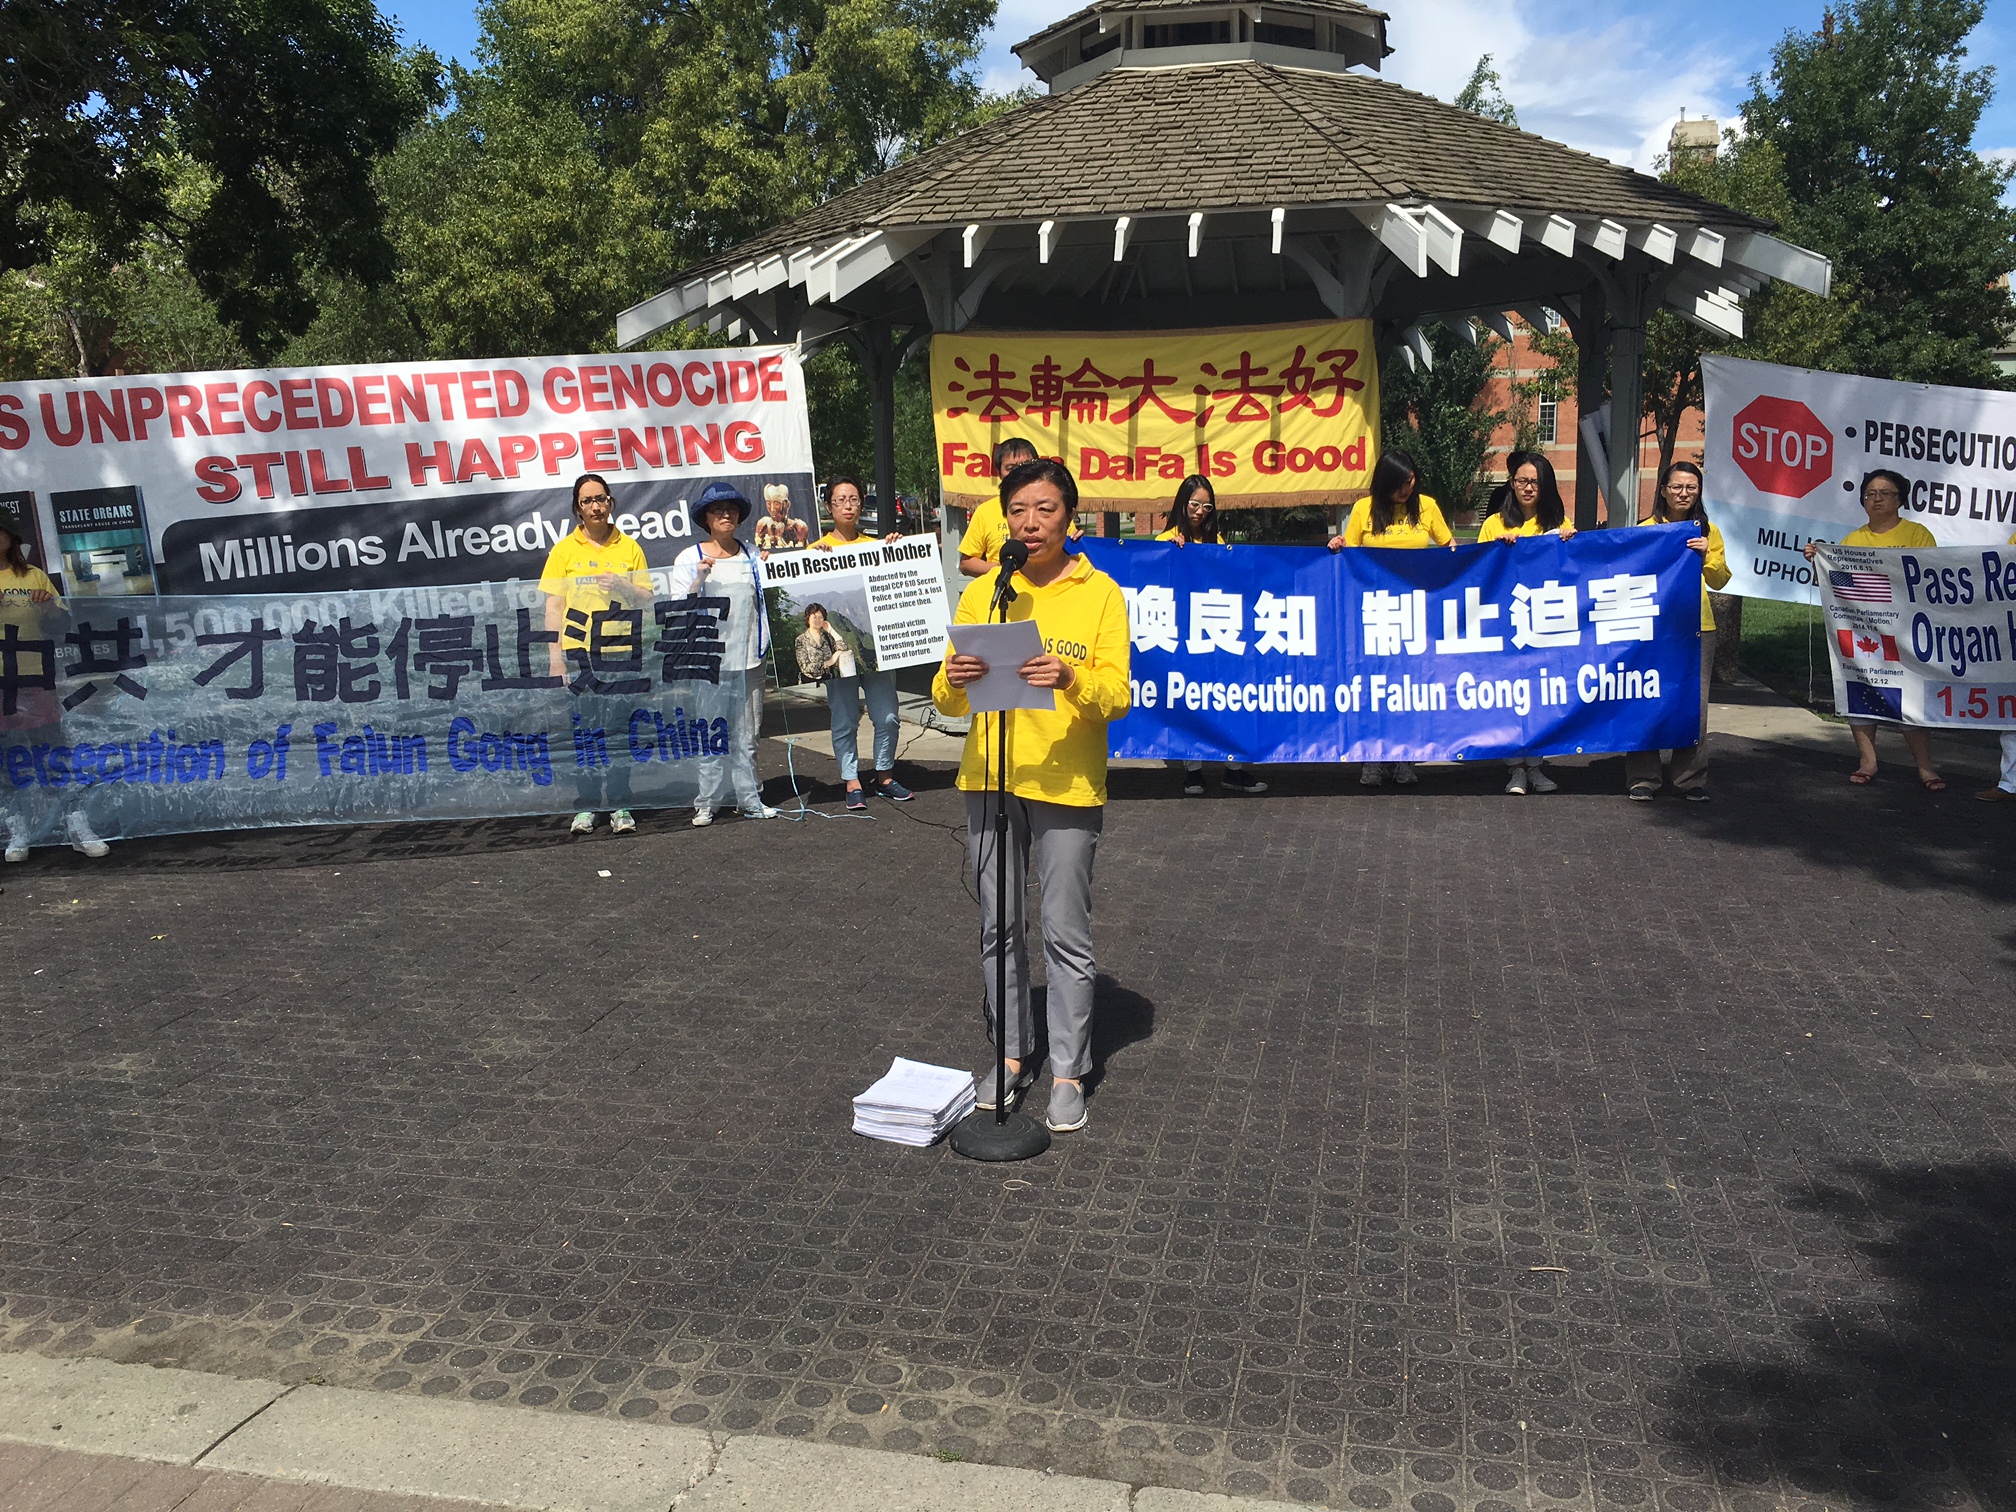 Minnan Liu speaks at a rally in Edmonton on July 23, 2016  to commemorate the 17th anniversary of the persecution of Falun Dafa in China. Liu presented the over 9,000 petitions signed by Edmontonians since last year to bring to justice the former Chinese leader Jiang Zemin who started the persecution on July 20, 1999. Behind her Hongyan Lu holds a sign asking for support to release her mother, Huixia Chen, who is currently detained in China for practicing Falun Dafa.  (Omid Ghoreishi/Epoch Times)